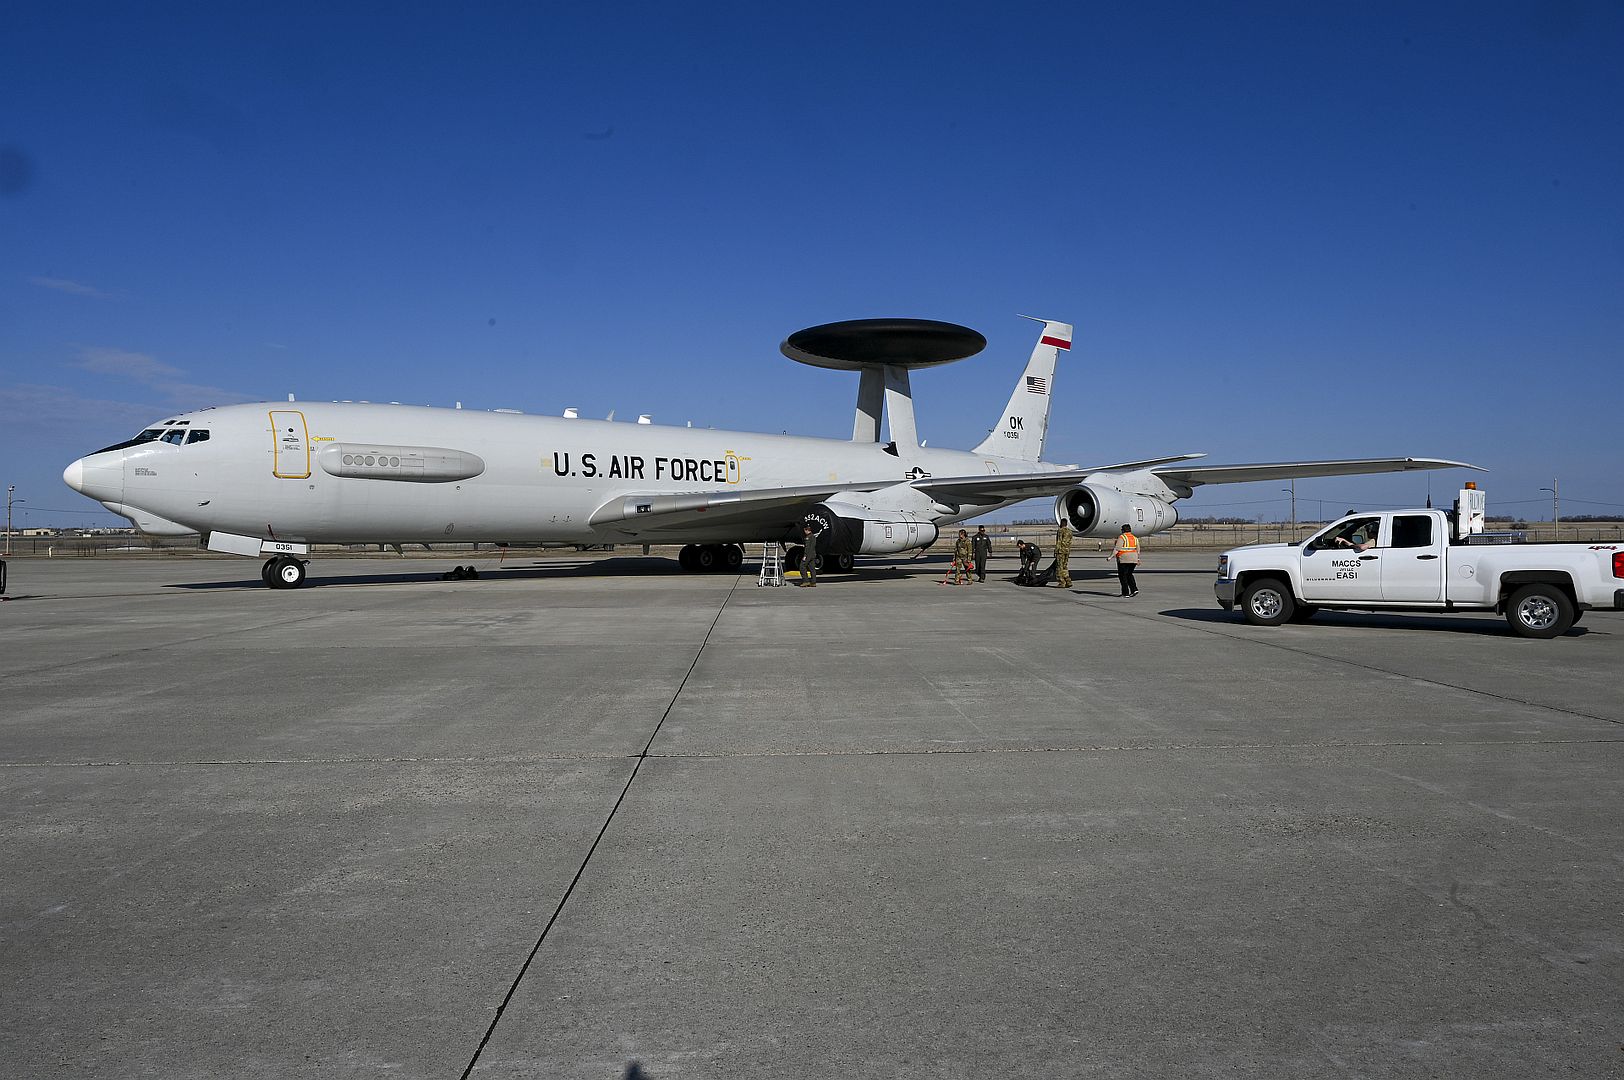 3 Sentry Assigned To Tinker Air Force Base Oklahoma Also Known As An Airborne Warning And Control System Aircraft Sits Parked At Minot Air Force Base North Dakota May 04 2022